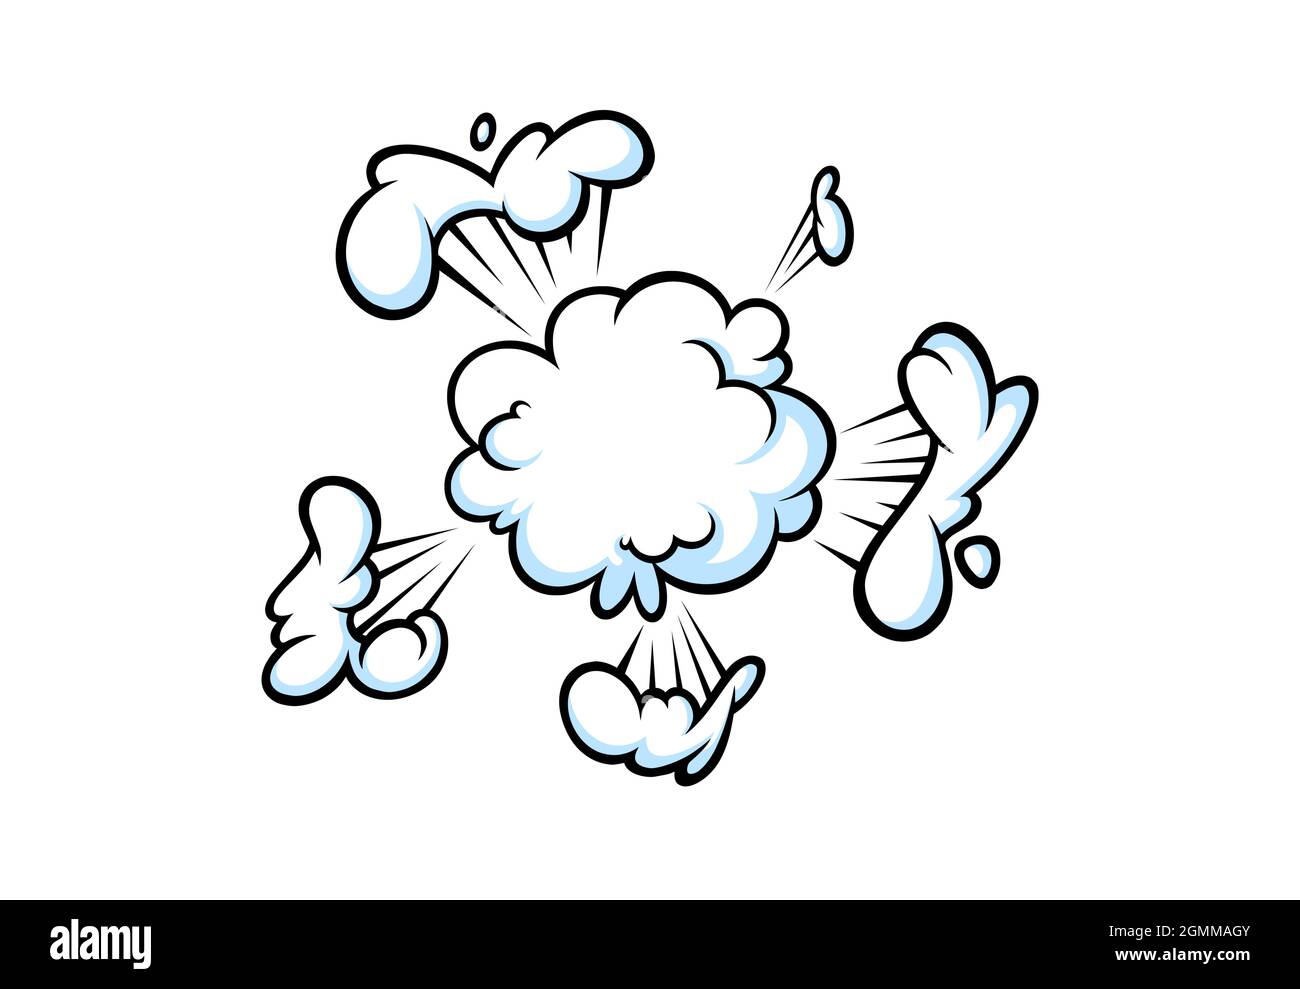 Speed hand drawn fast motion clouds, smoke blast or puff cloud